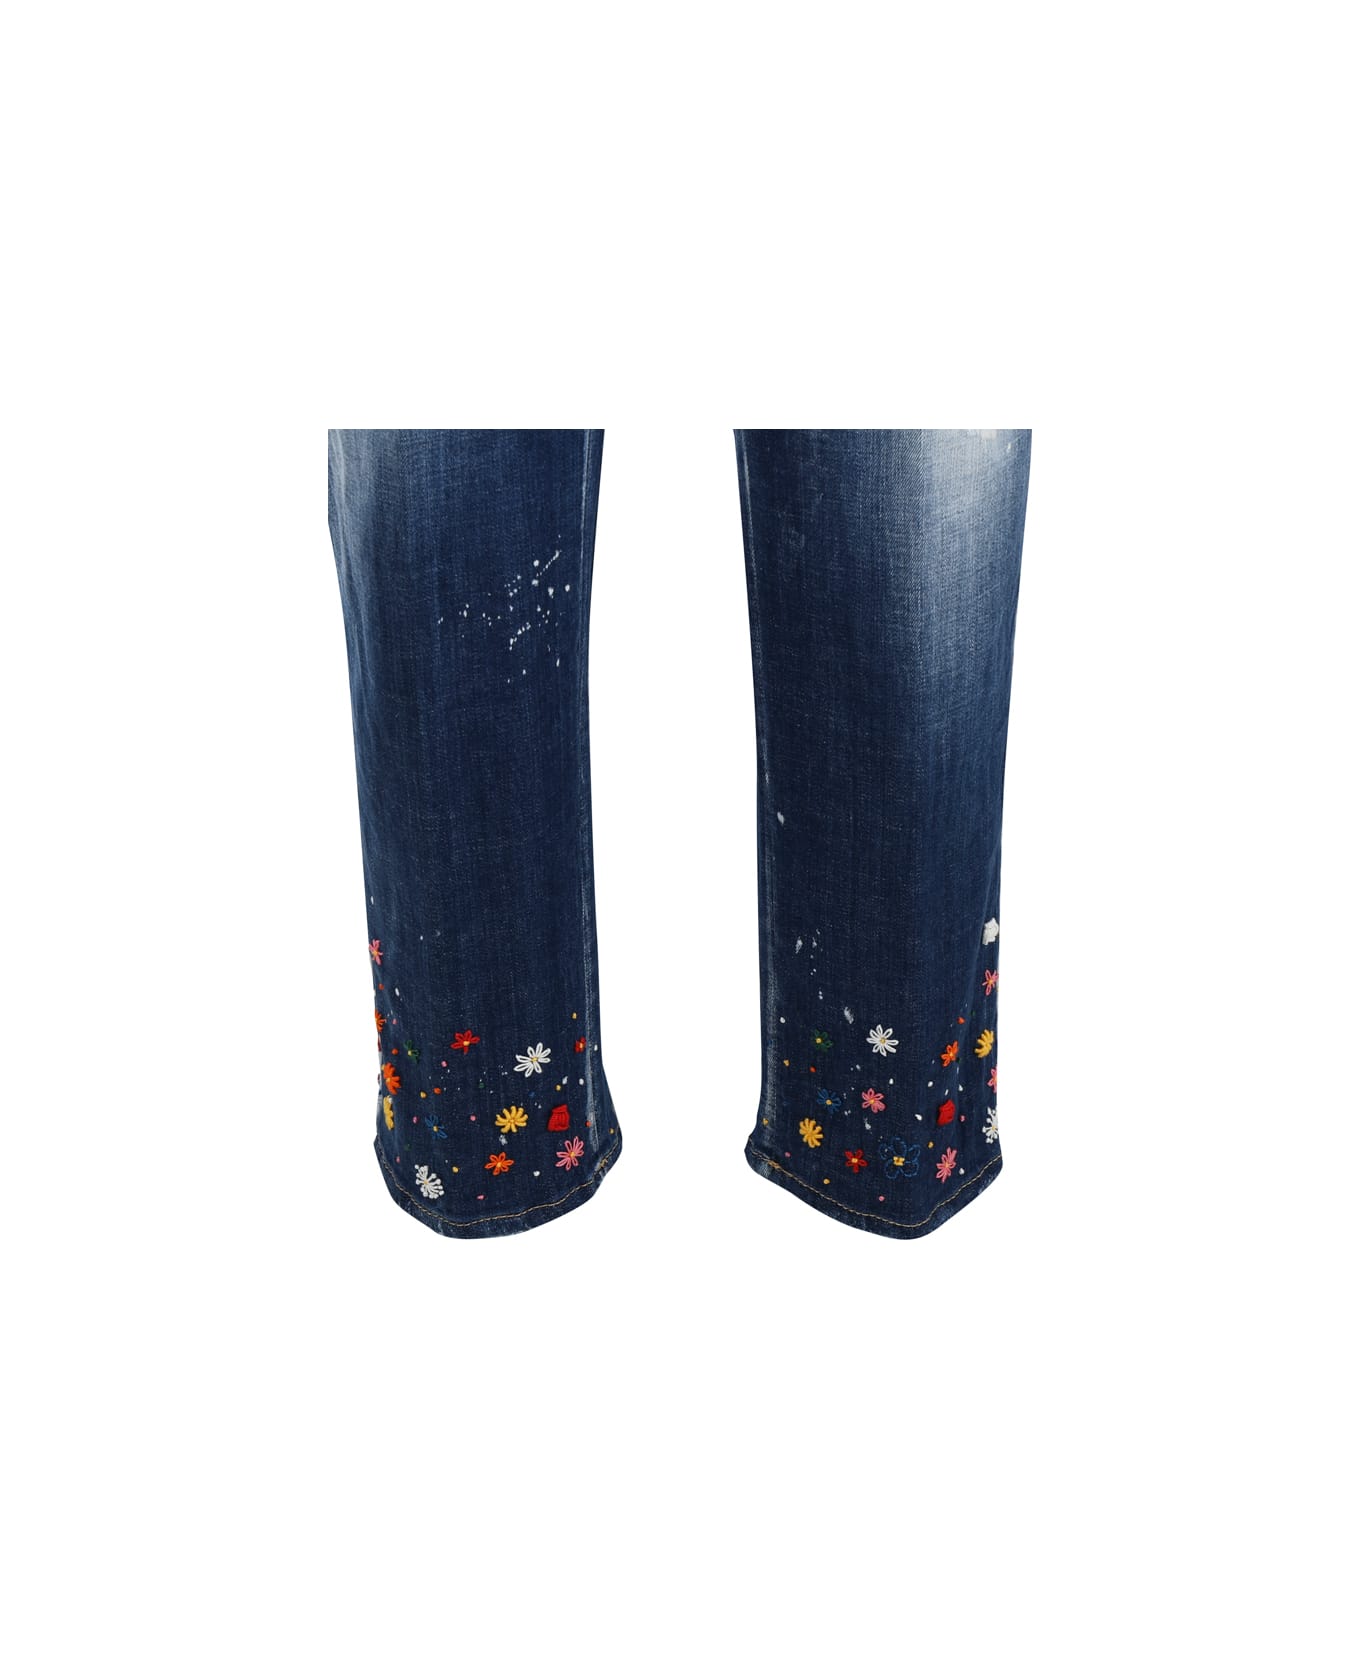 Dsquared2 Cool Guy Jeans - Blue navy ボトムス